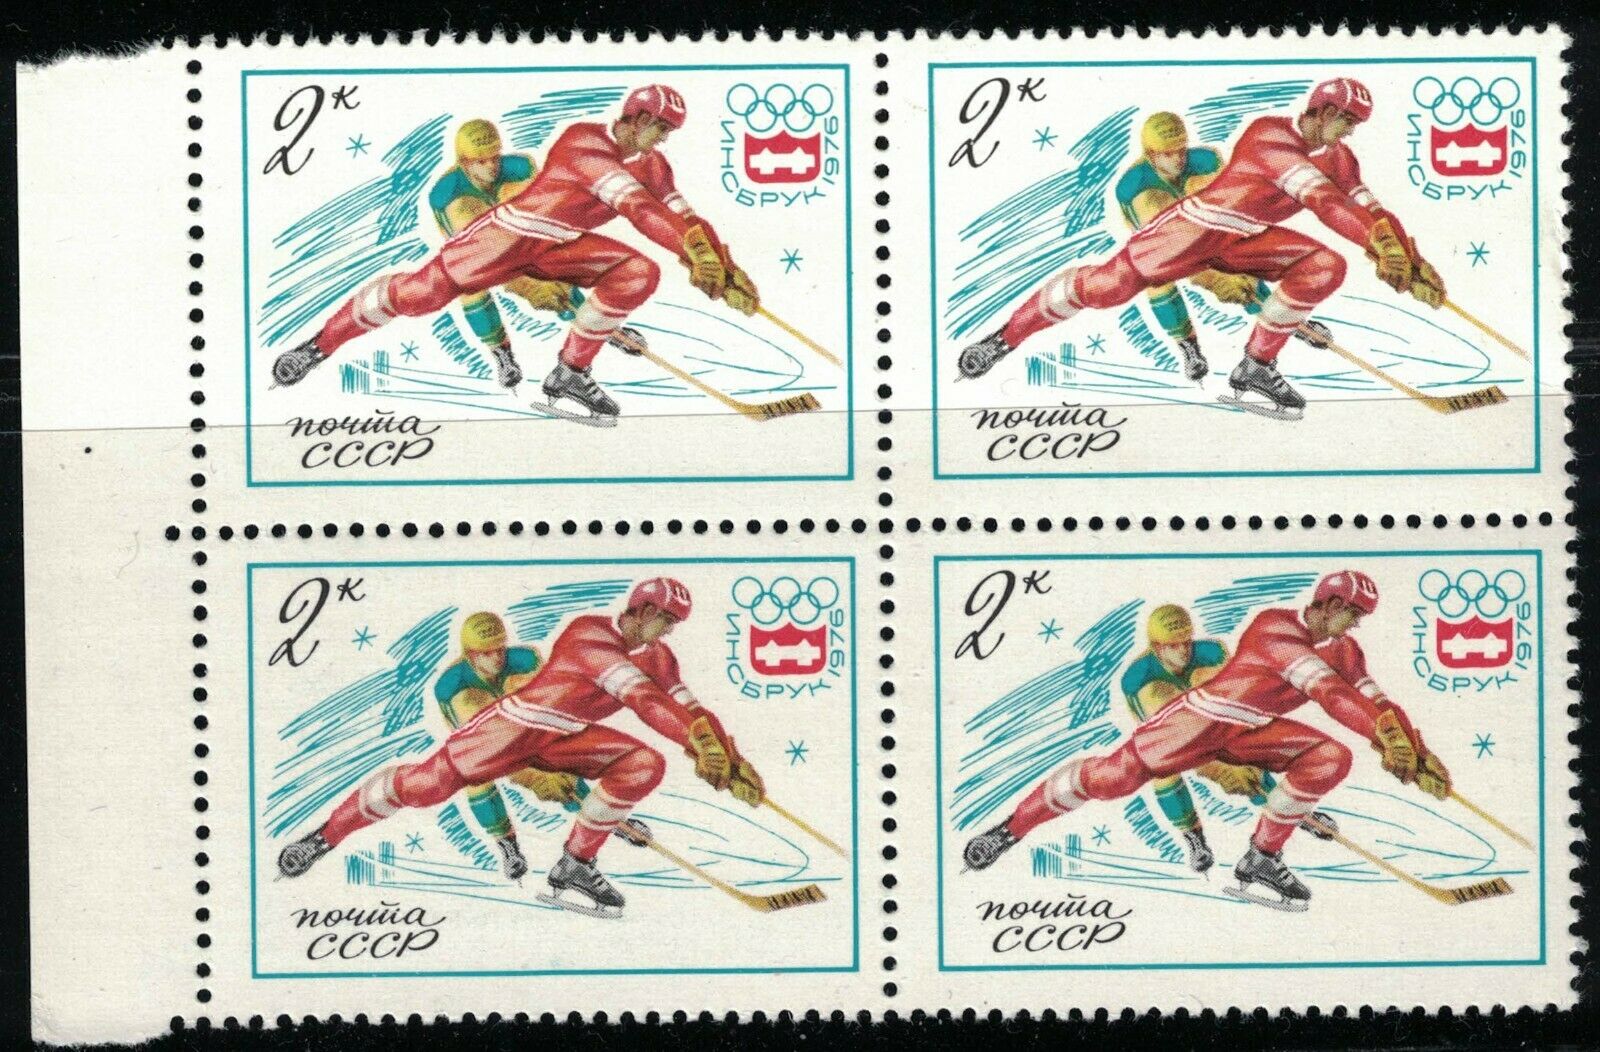 Russia,ussr:1976 Sc#4410 Block Of 4 Mnh Winter Olympic Games Ice Hockey